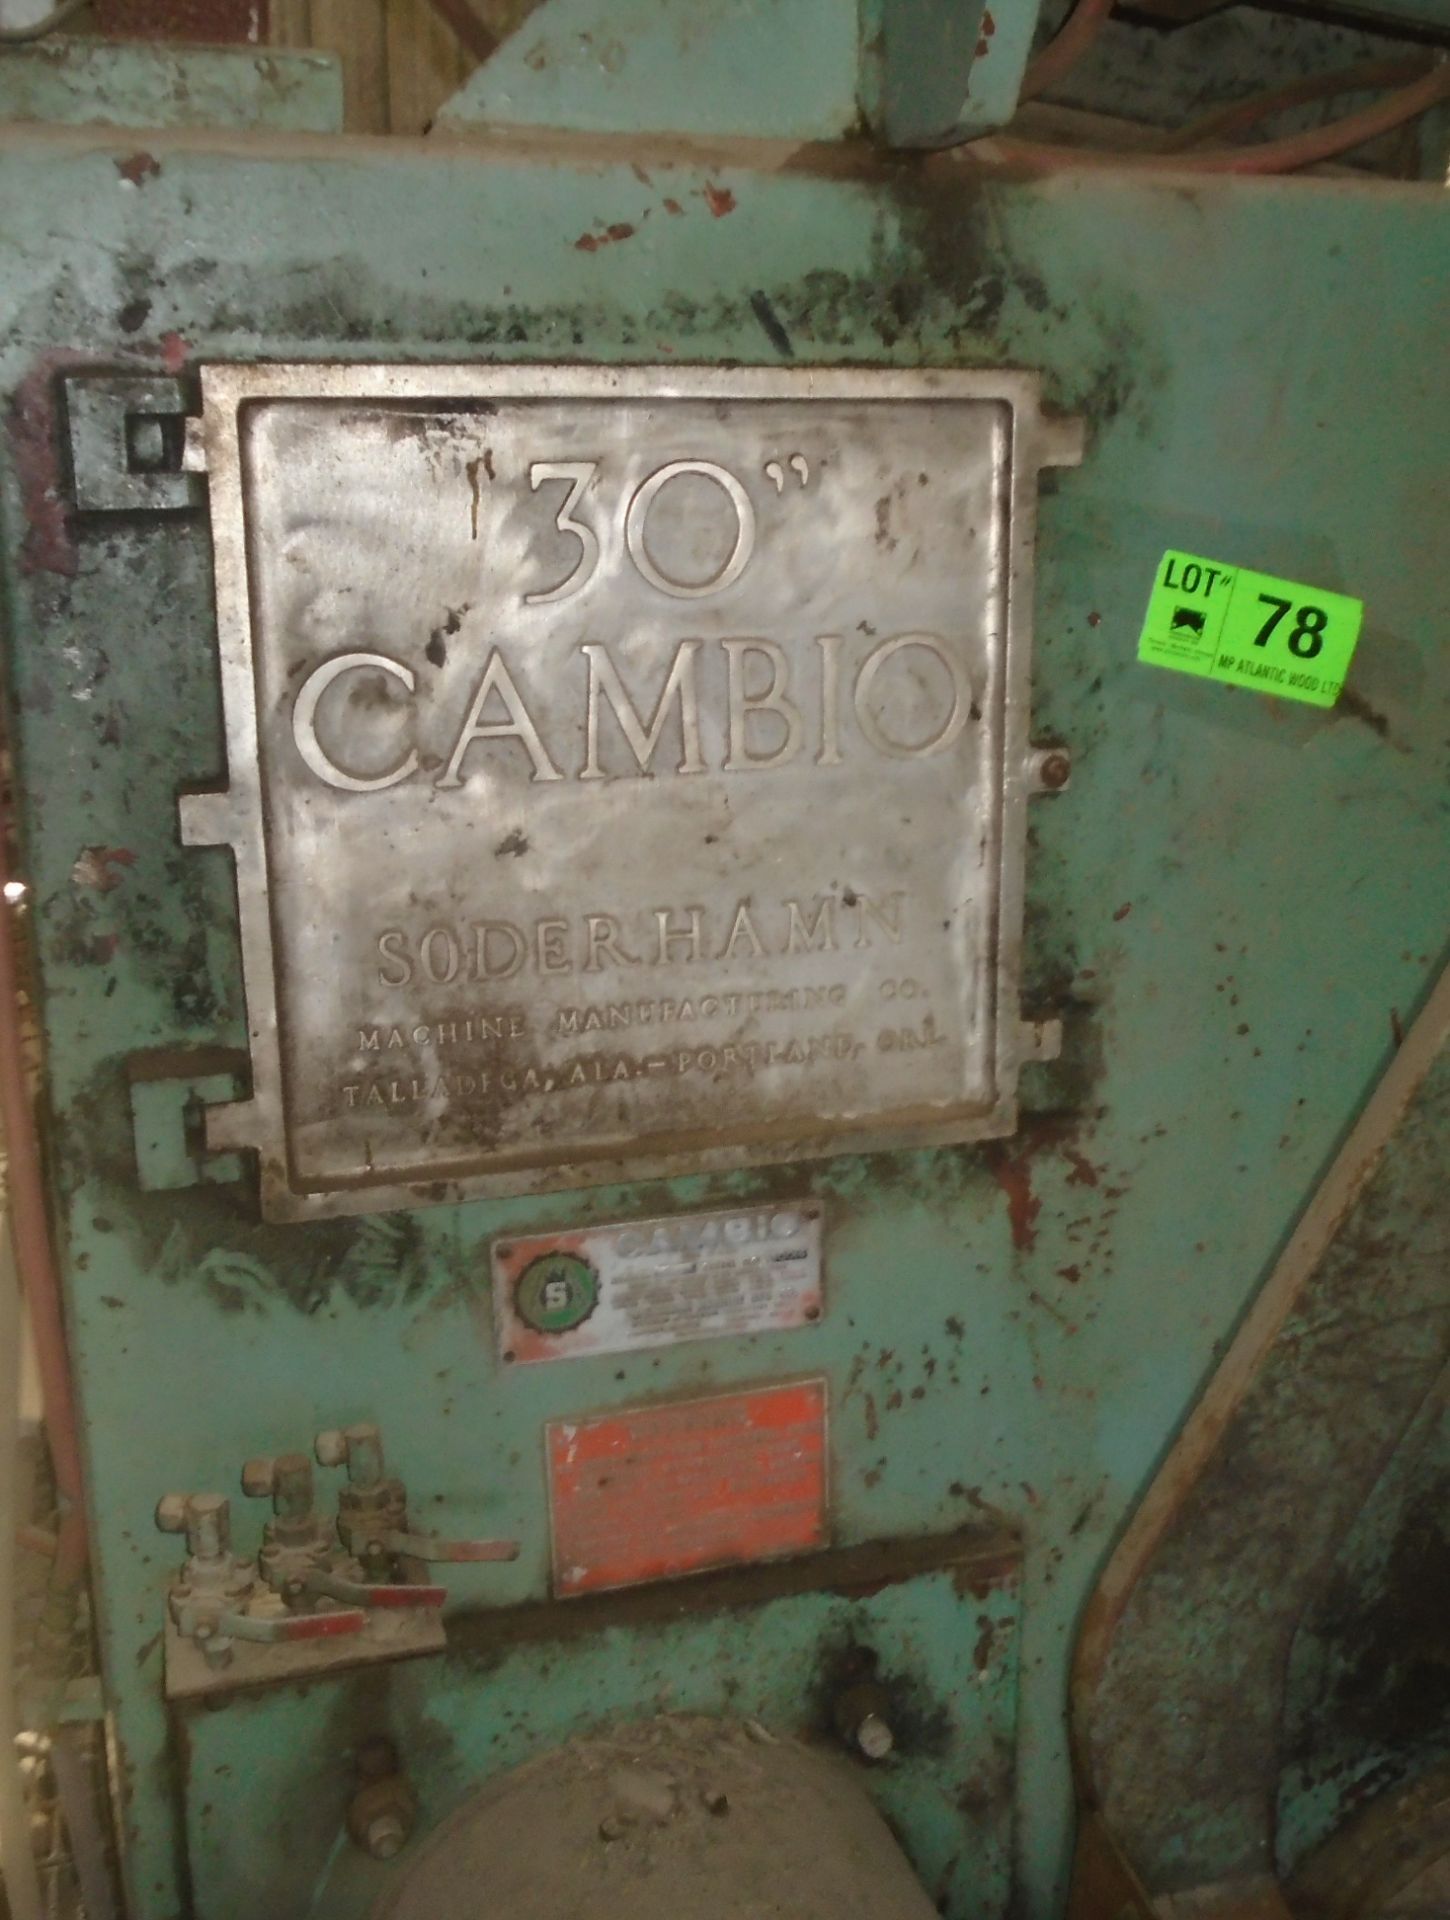 CAMBIO 30" RING DEBARKER WITH (5) TOOL ROTOR, SELF-CENTERING INFEED, APPROX. 50 HP, OPERATOR - Image 6 of 7